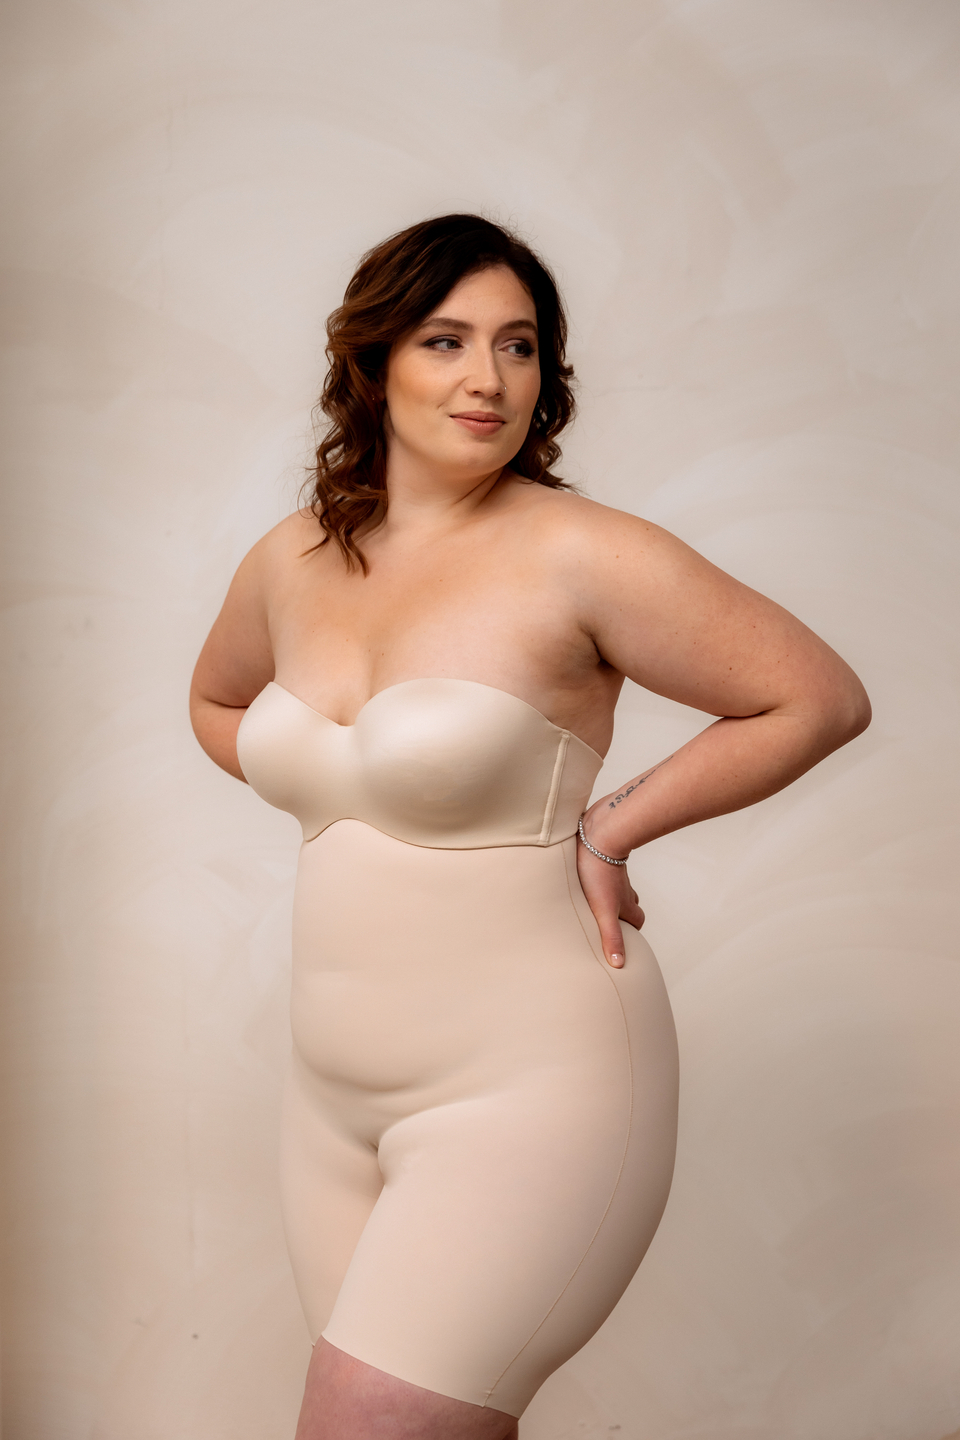 Your Guide to Plus Size Bridal Shapewear, Dia & Co